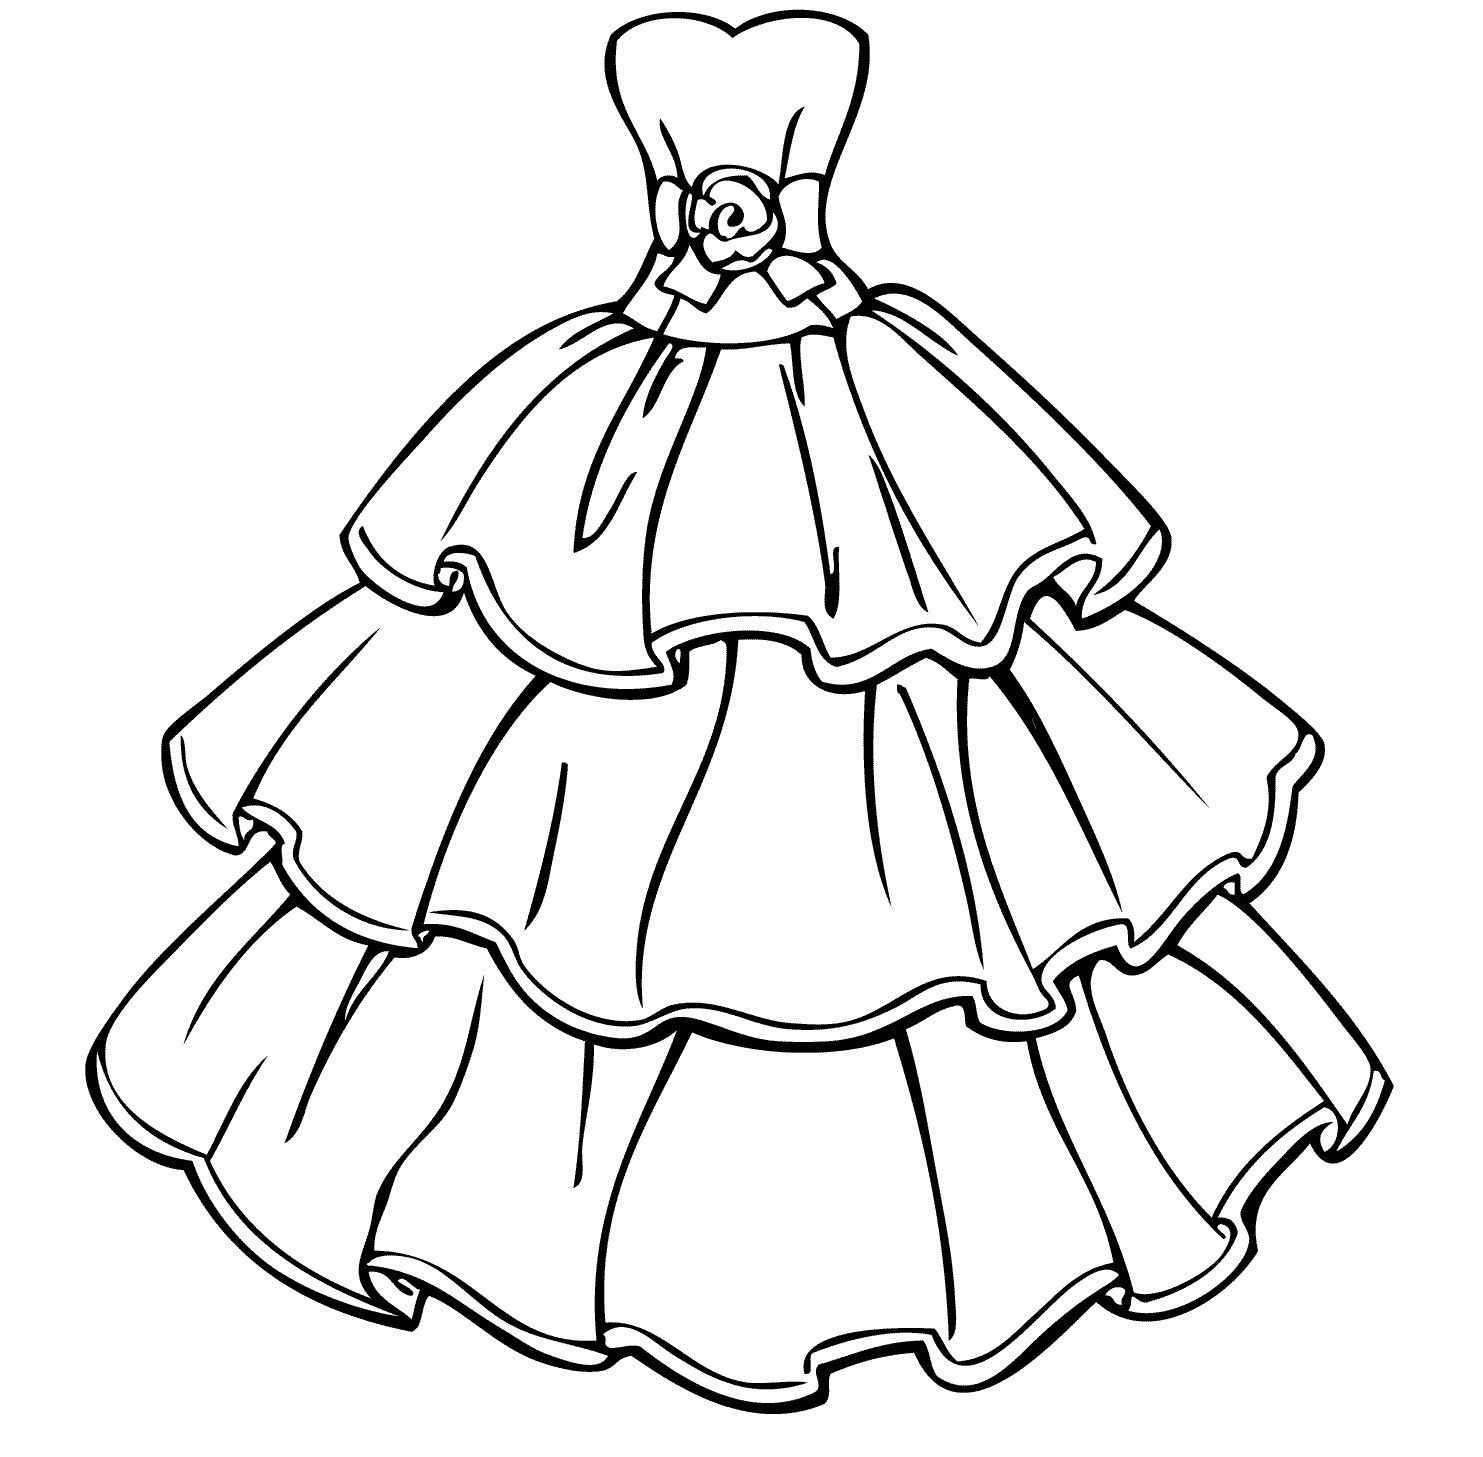 Princess Dress Coloring Pages   Coloring Home